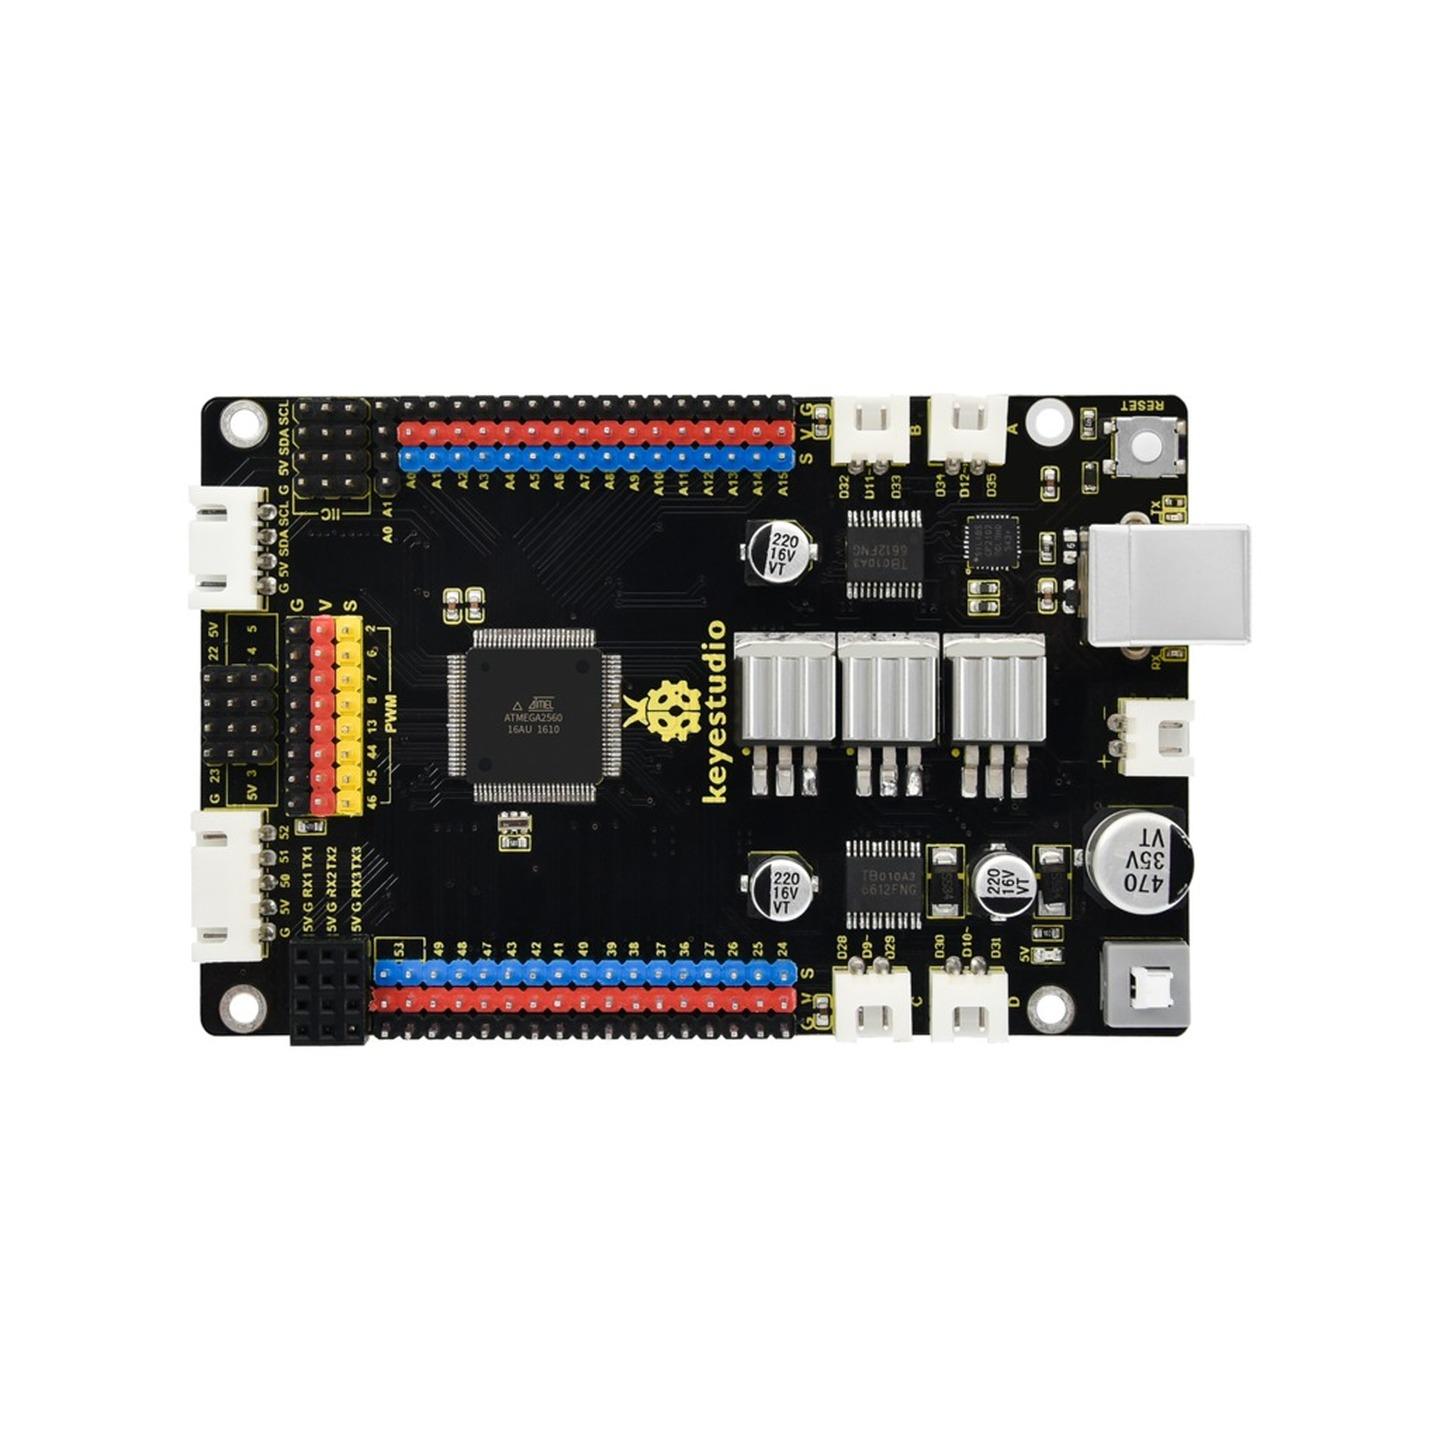 Duinotech MEGA 2560 r3 Main Board with Motor Controller Expansion